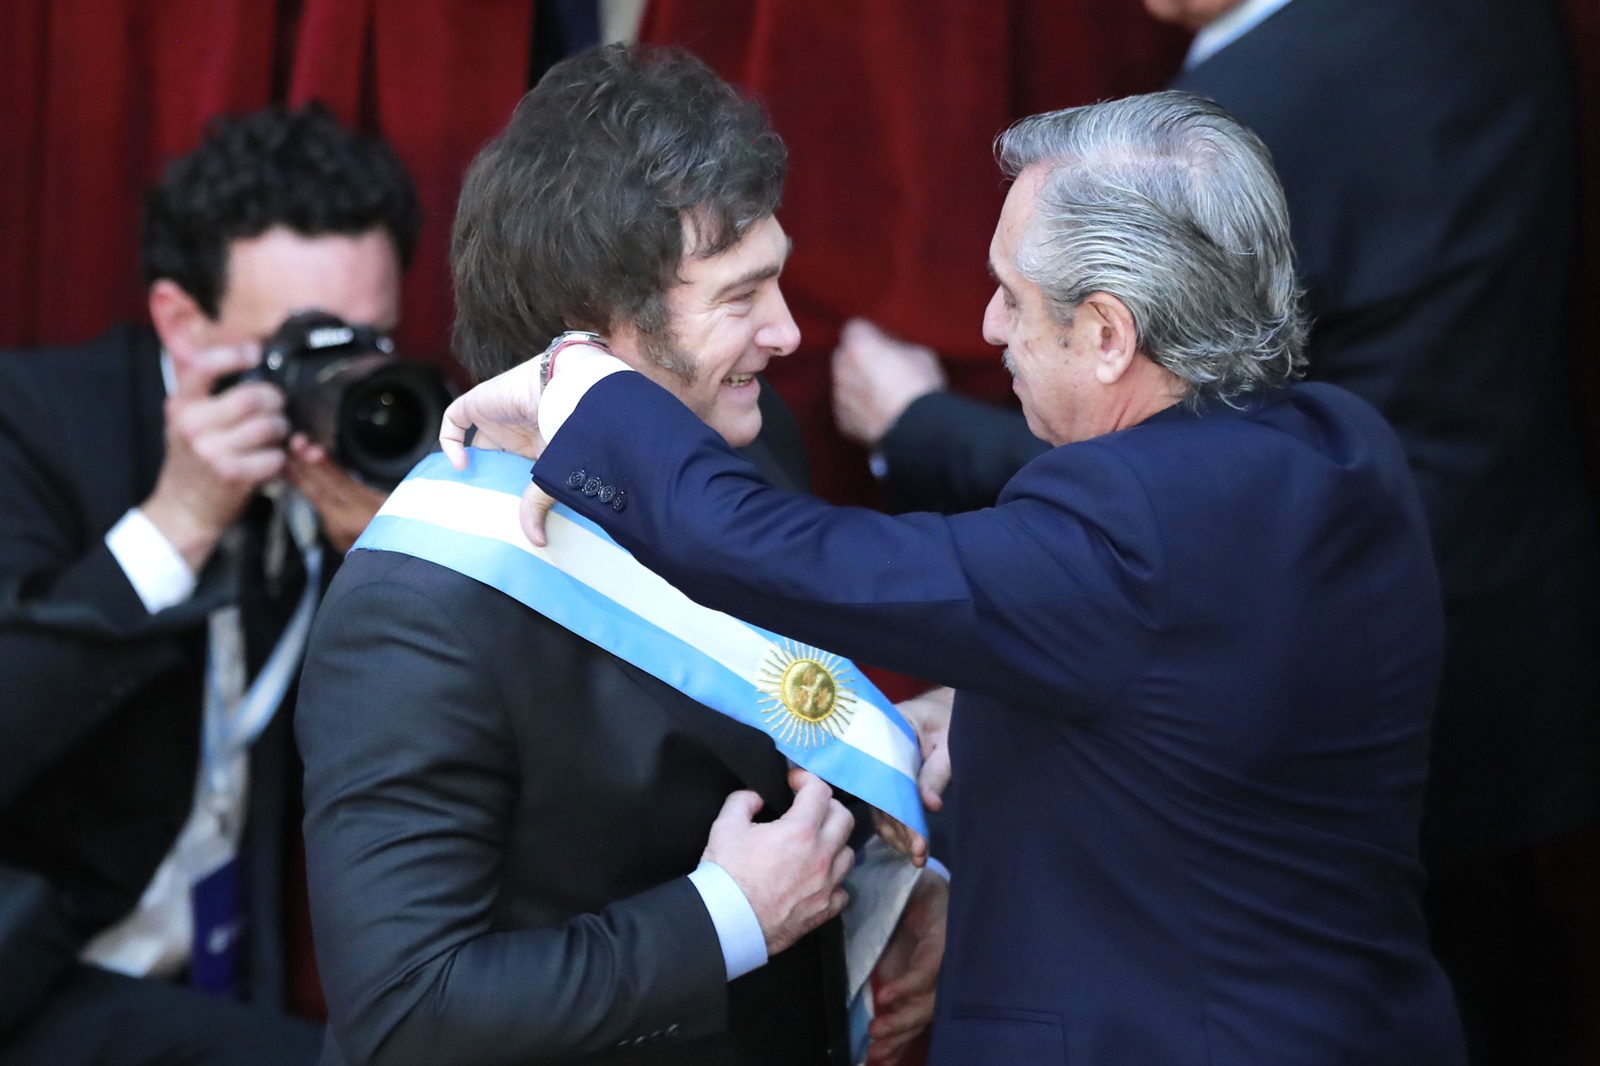 epa11021504 President of Argentina Javier Milei (L) receives the presidential sash from the outgoing President Alberto Fernandez, during the ceremony at the National Congress, Buenos Aires, Argentina, 10 December 2023. The far-right libertarian economist Milei will be sworn in at the National Congress to become president of the South American country for the period 2023-2027 after winning the runoff election on 19 November.  EPA/Demian Alday Estevez